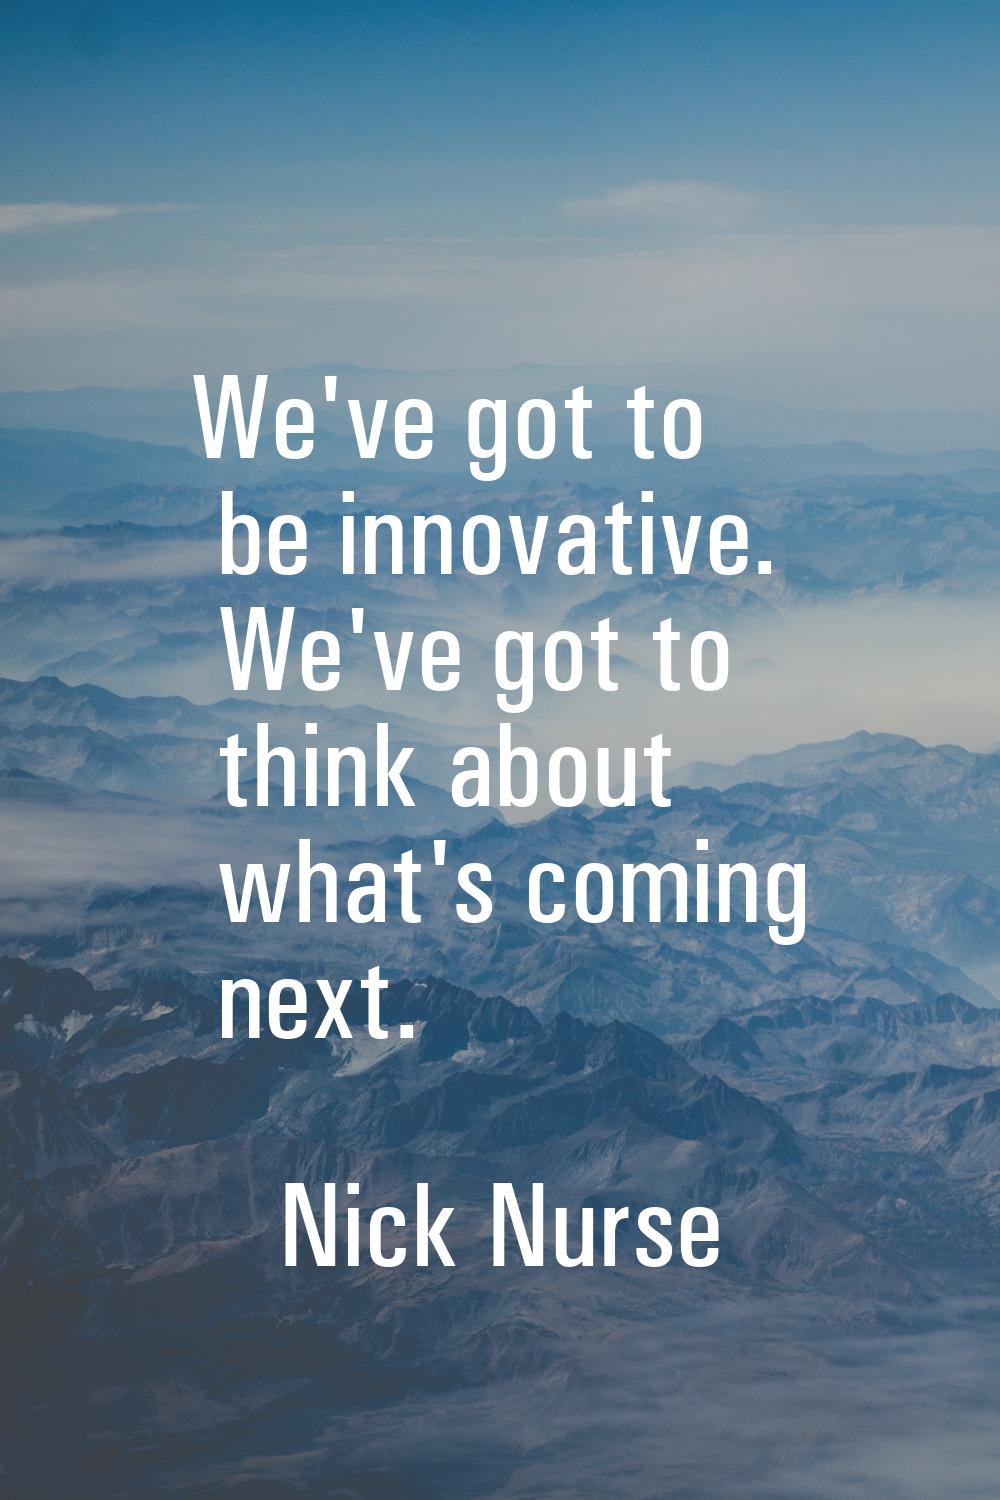 We've got to be innovative. We've got to think about what's coming next.